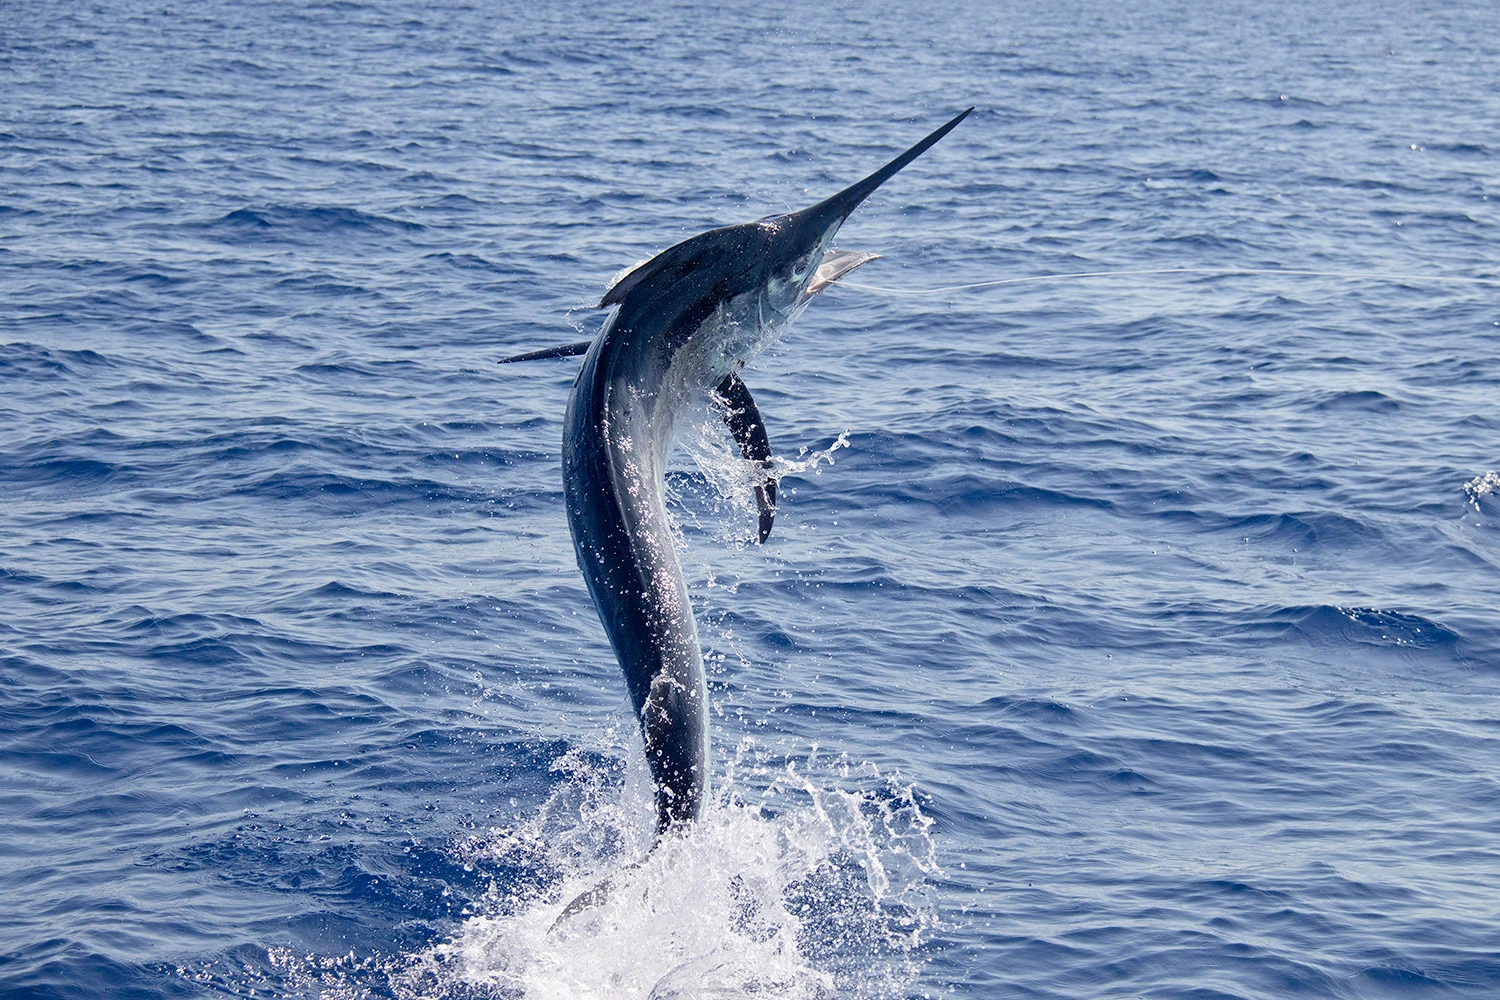 Marlin are a Popular Target When Fishing the Maldives